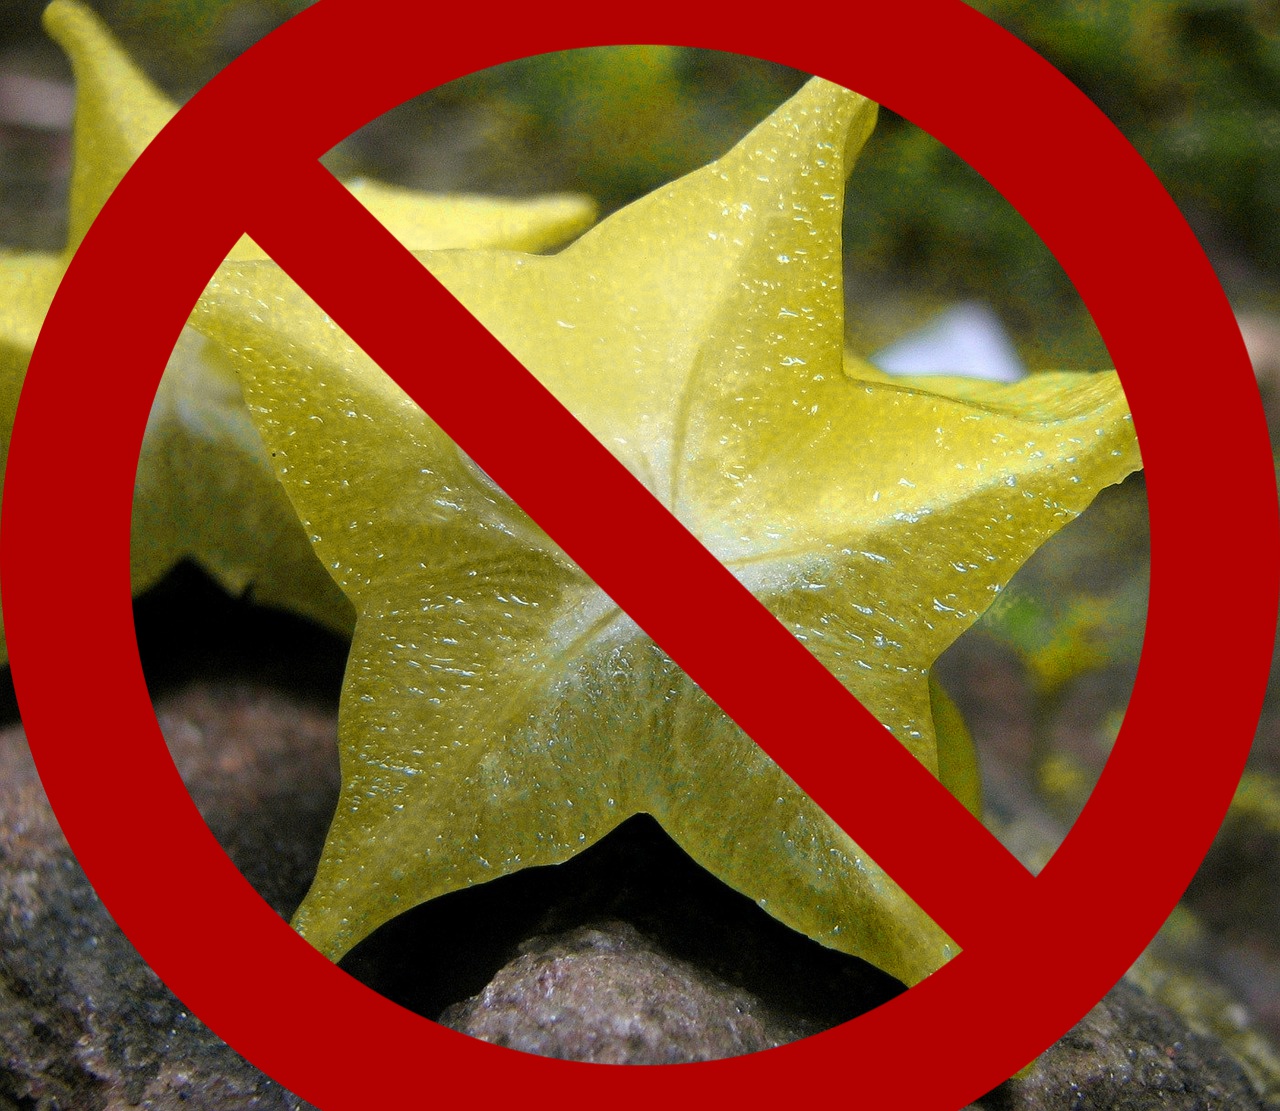 Don't take star fruit if you have kidneys issues